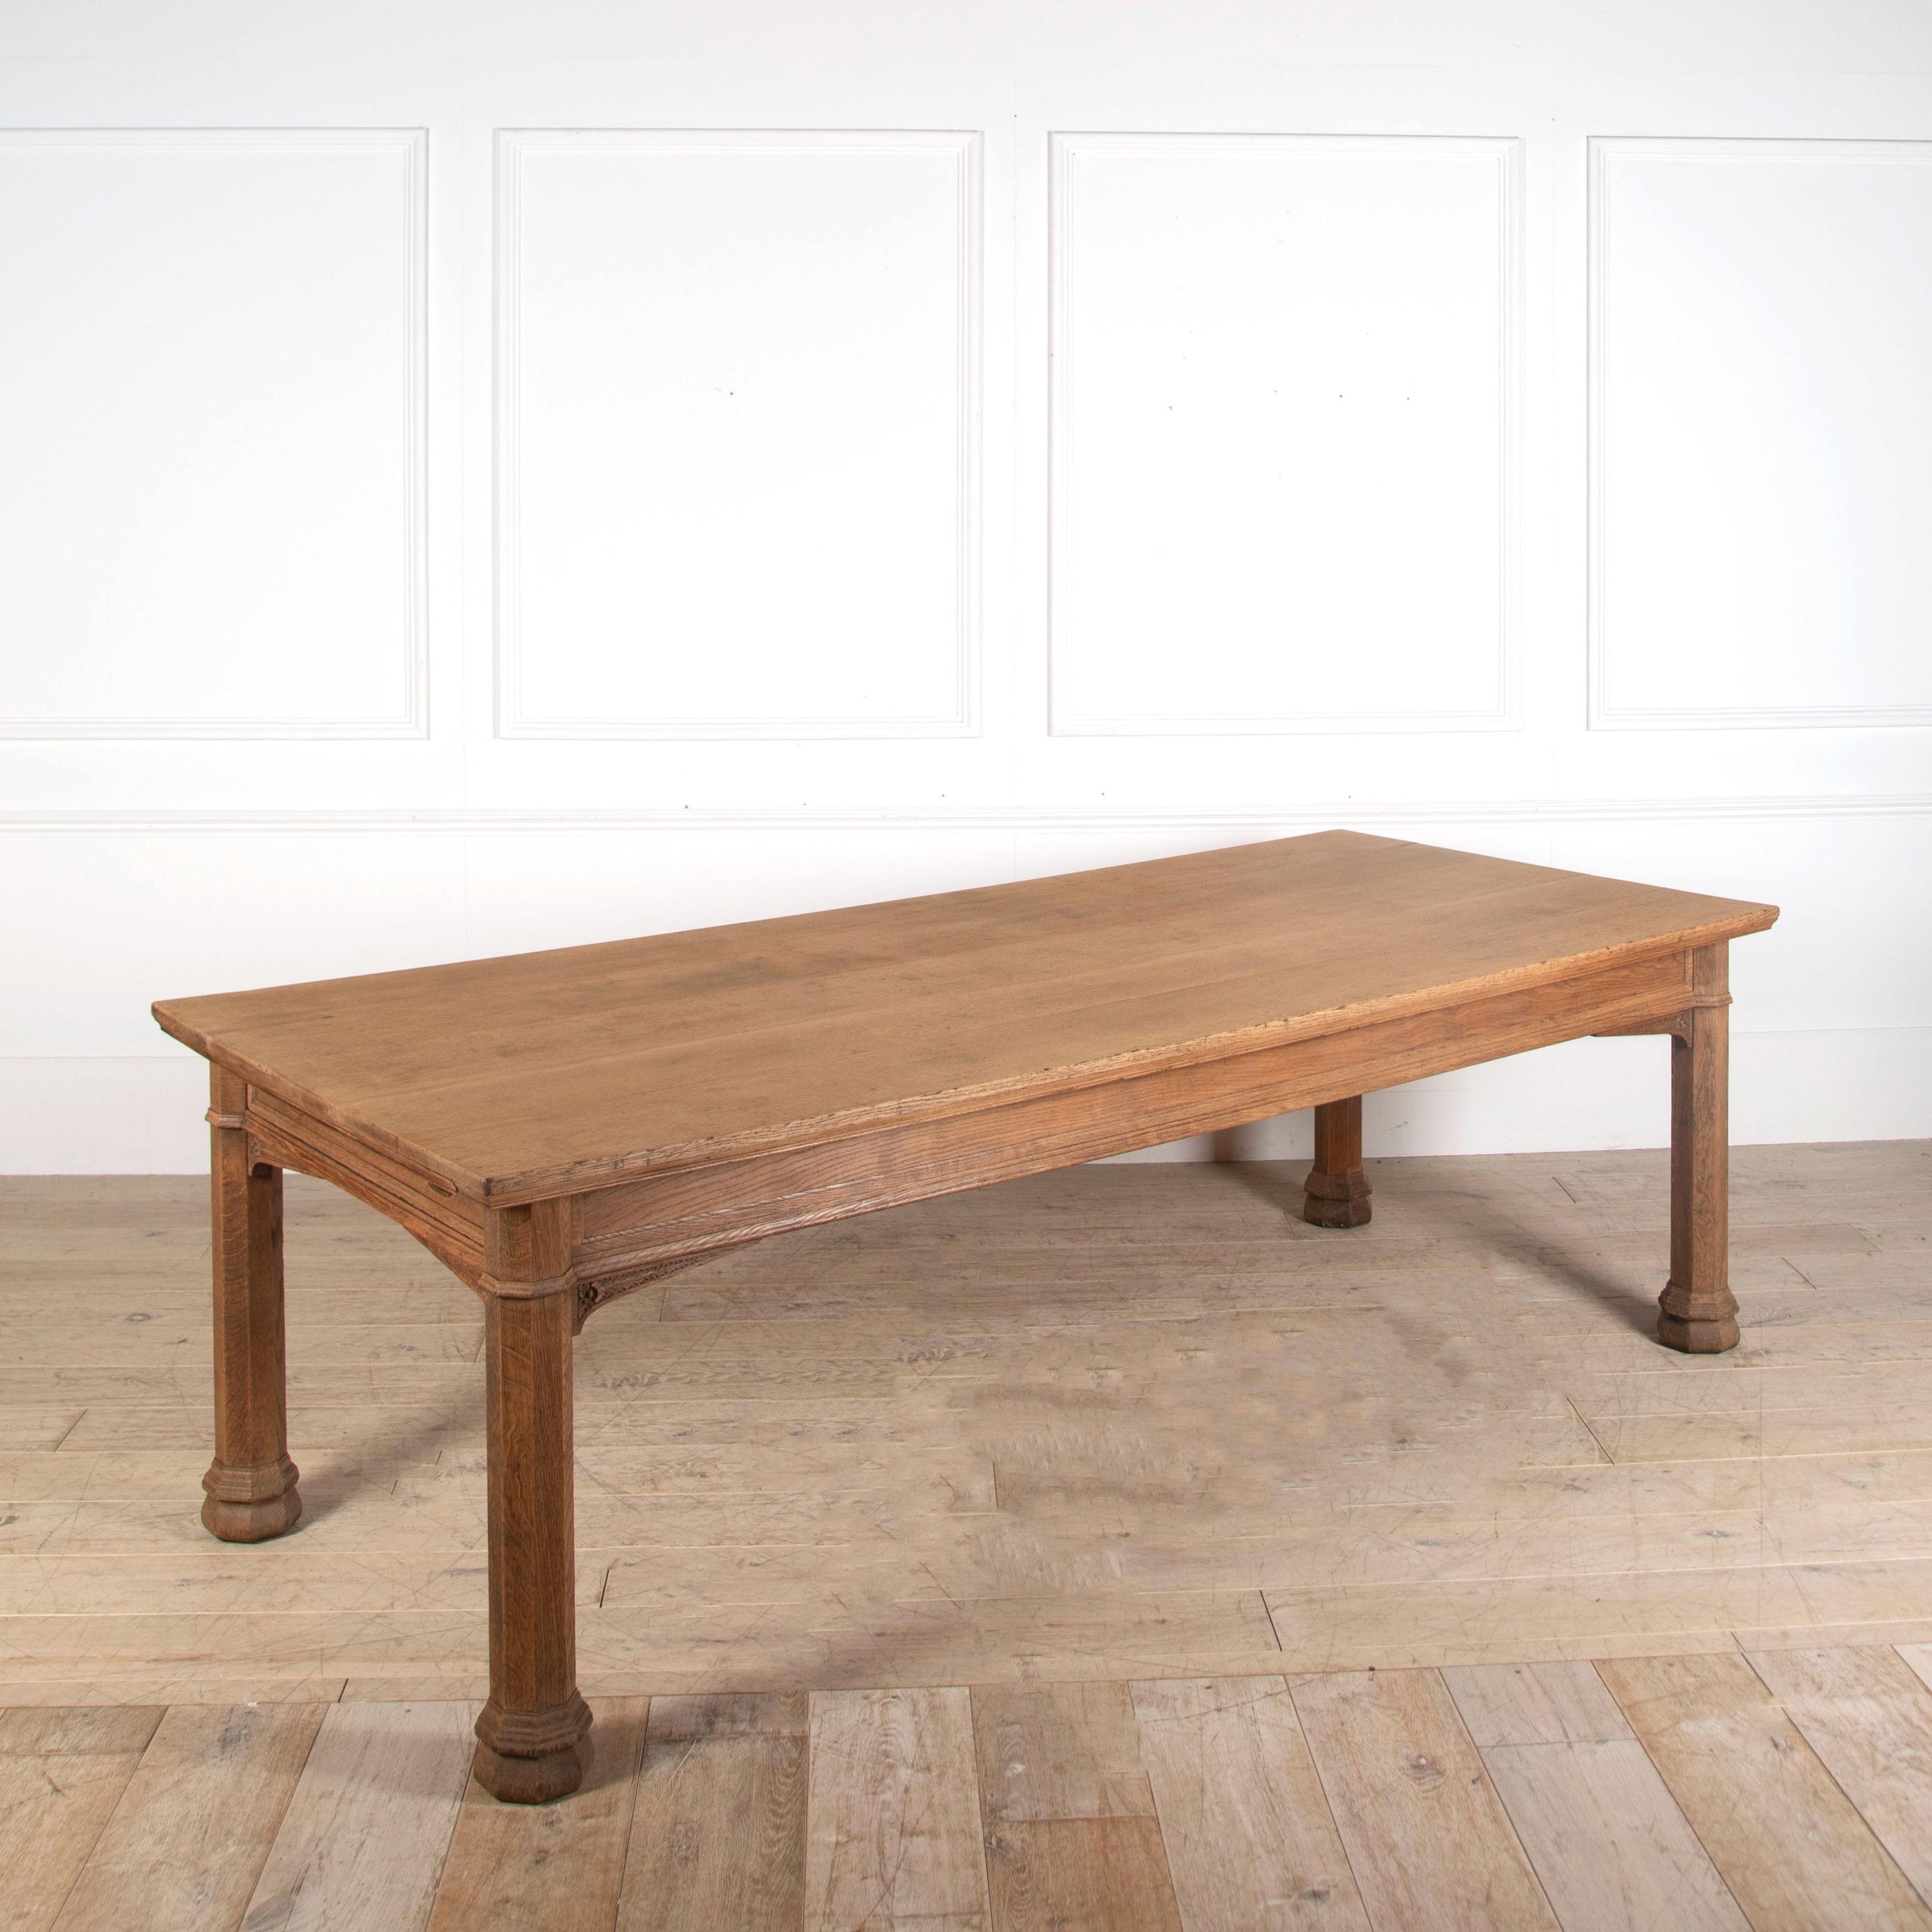 A late 19th century Pugin style Gothic light oak refectory table featuring carved lancet details and octagonal profile legs. A superbly useful size table, in dry a finish with a frieze drawer. English Country House appeal.